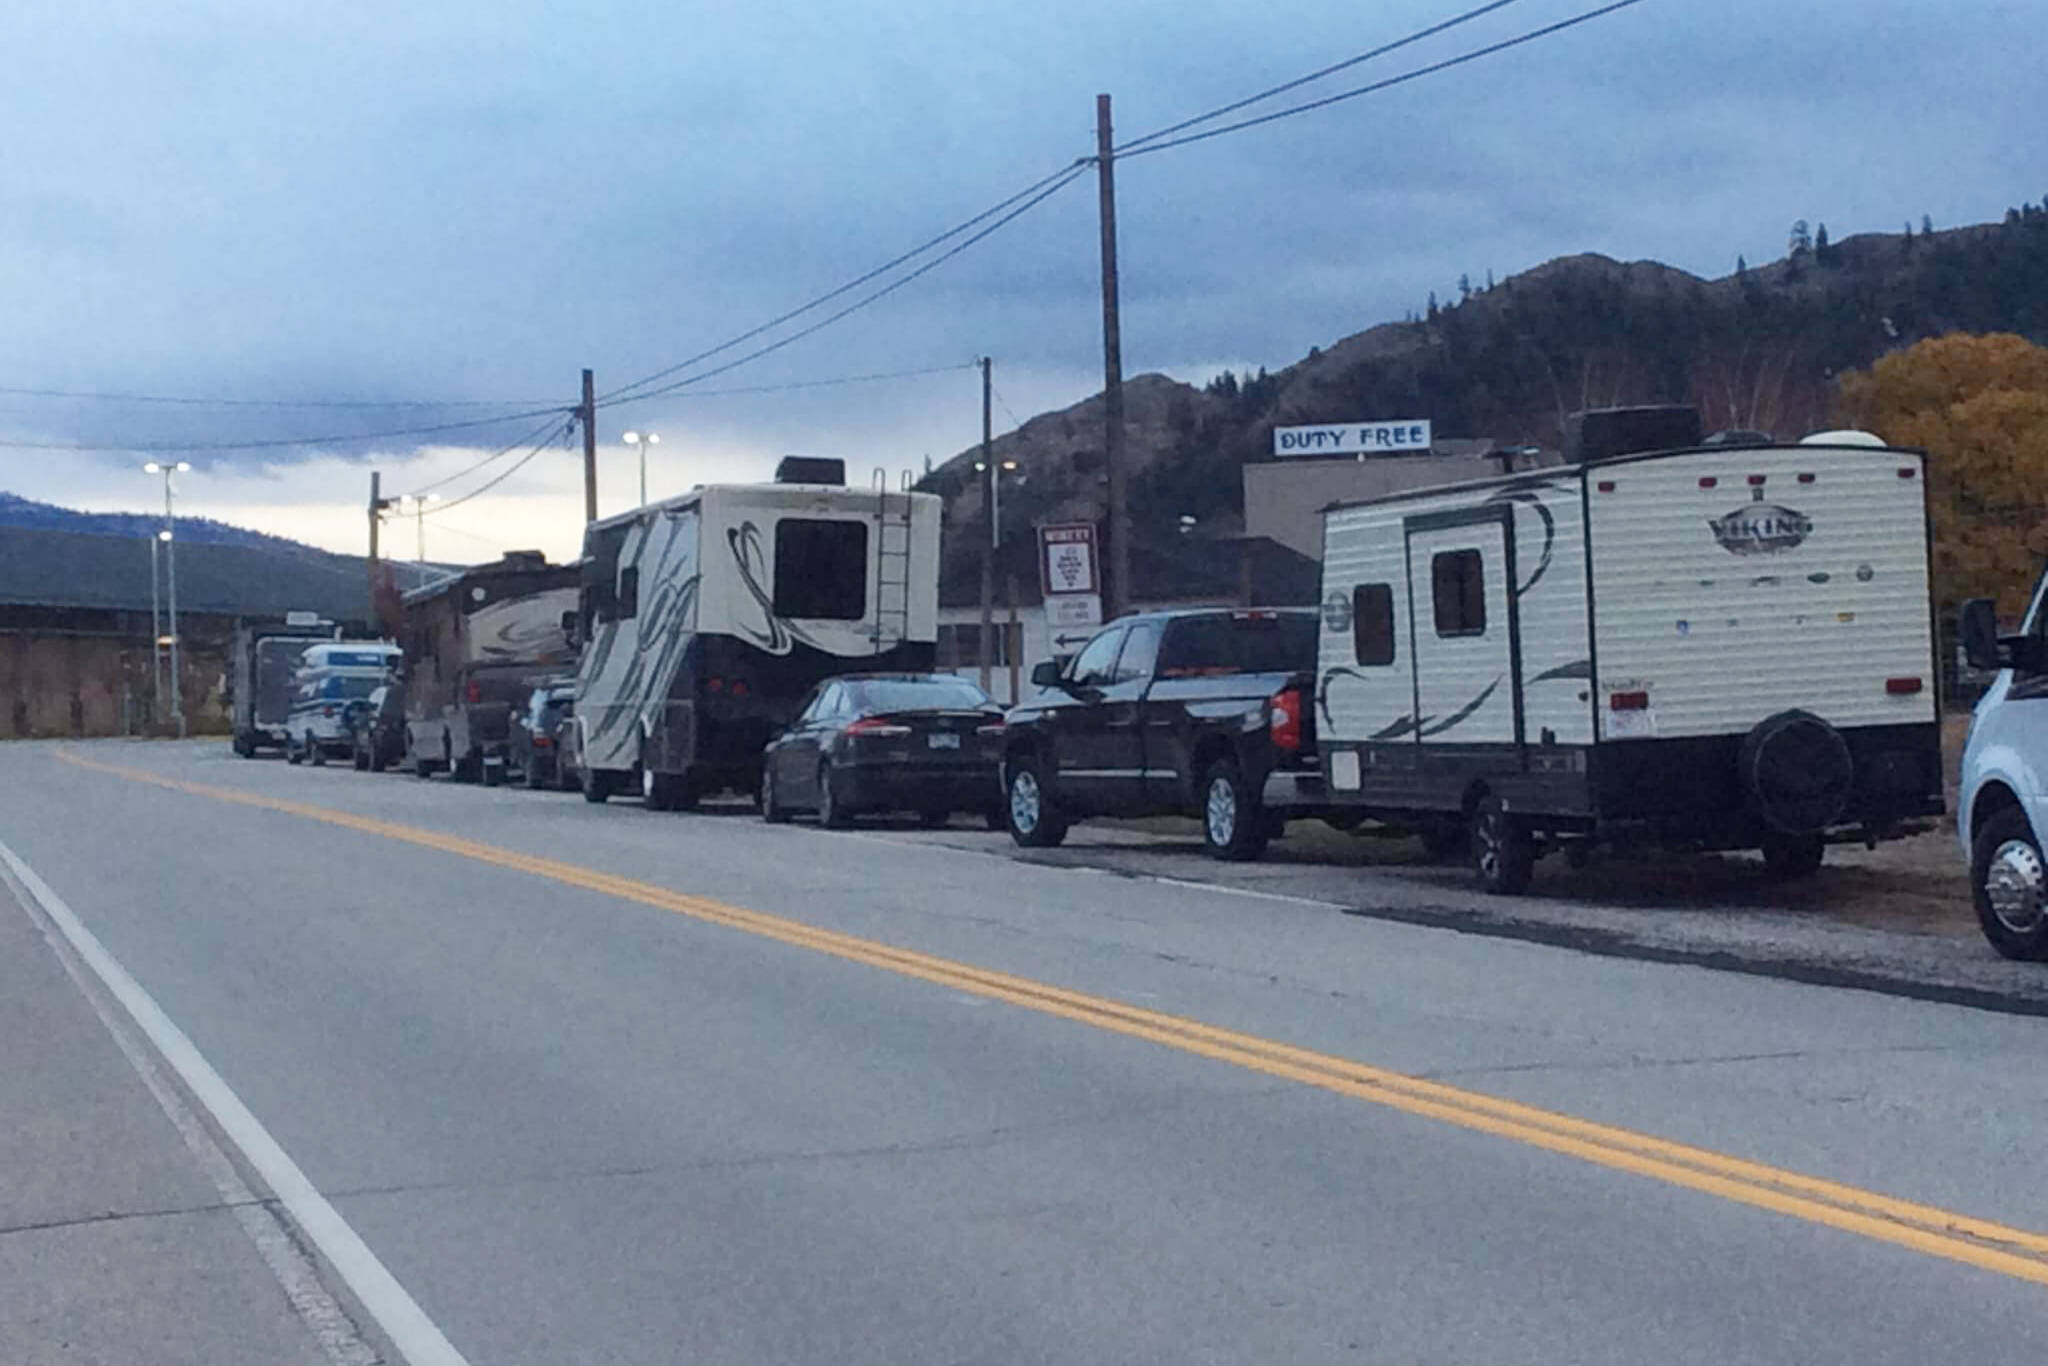 RVs and trailers were lined up as far as the eye could see on Sunday, Nov. 7 to get across the U.S. border in Osoyoos. (Rose-Anne Atkinson Facebook)